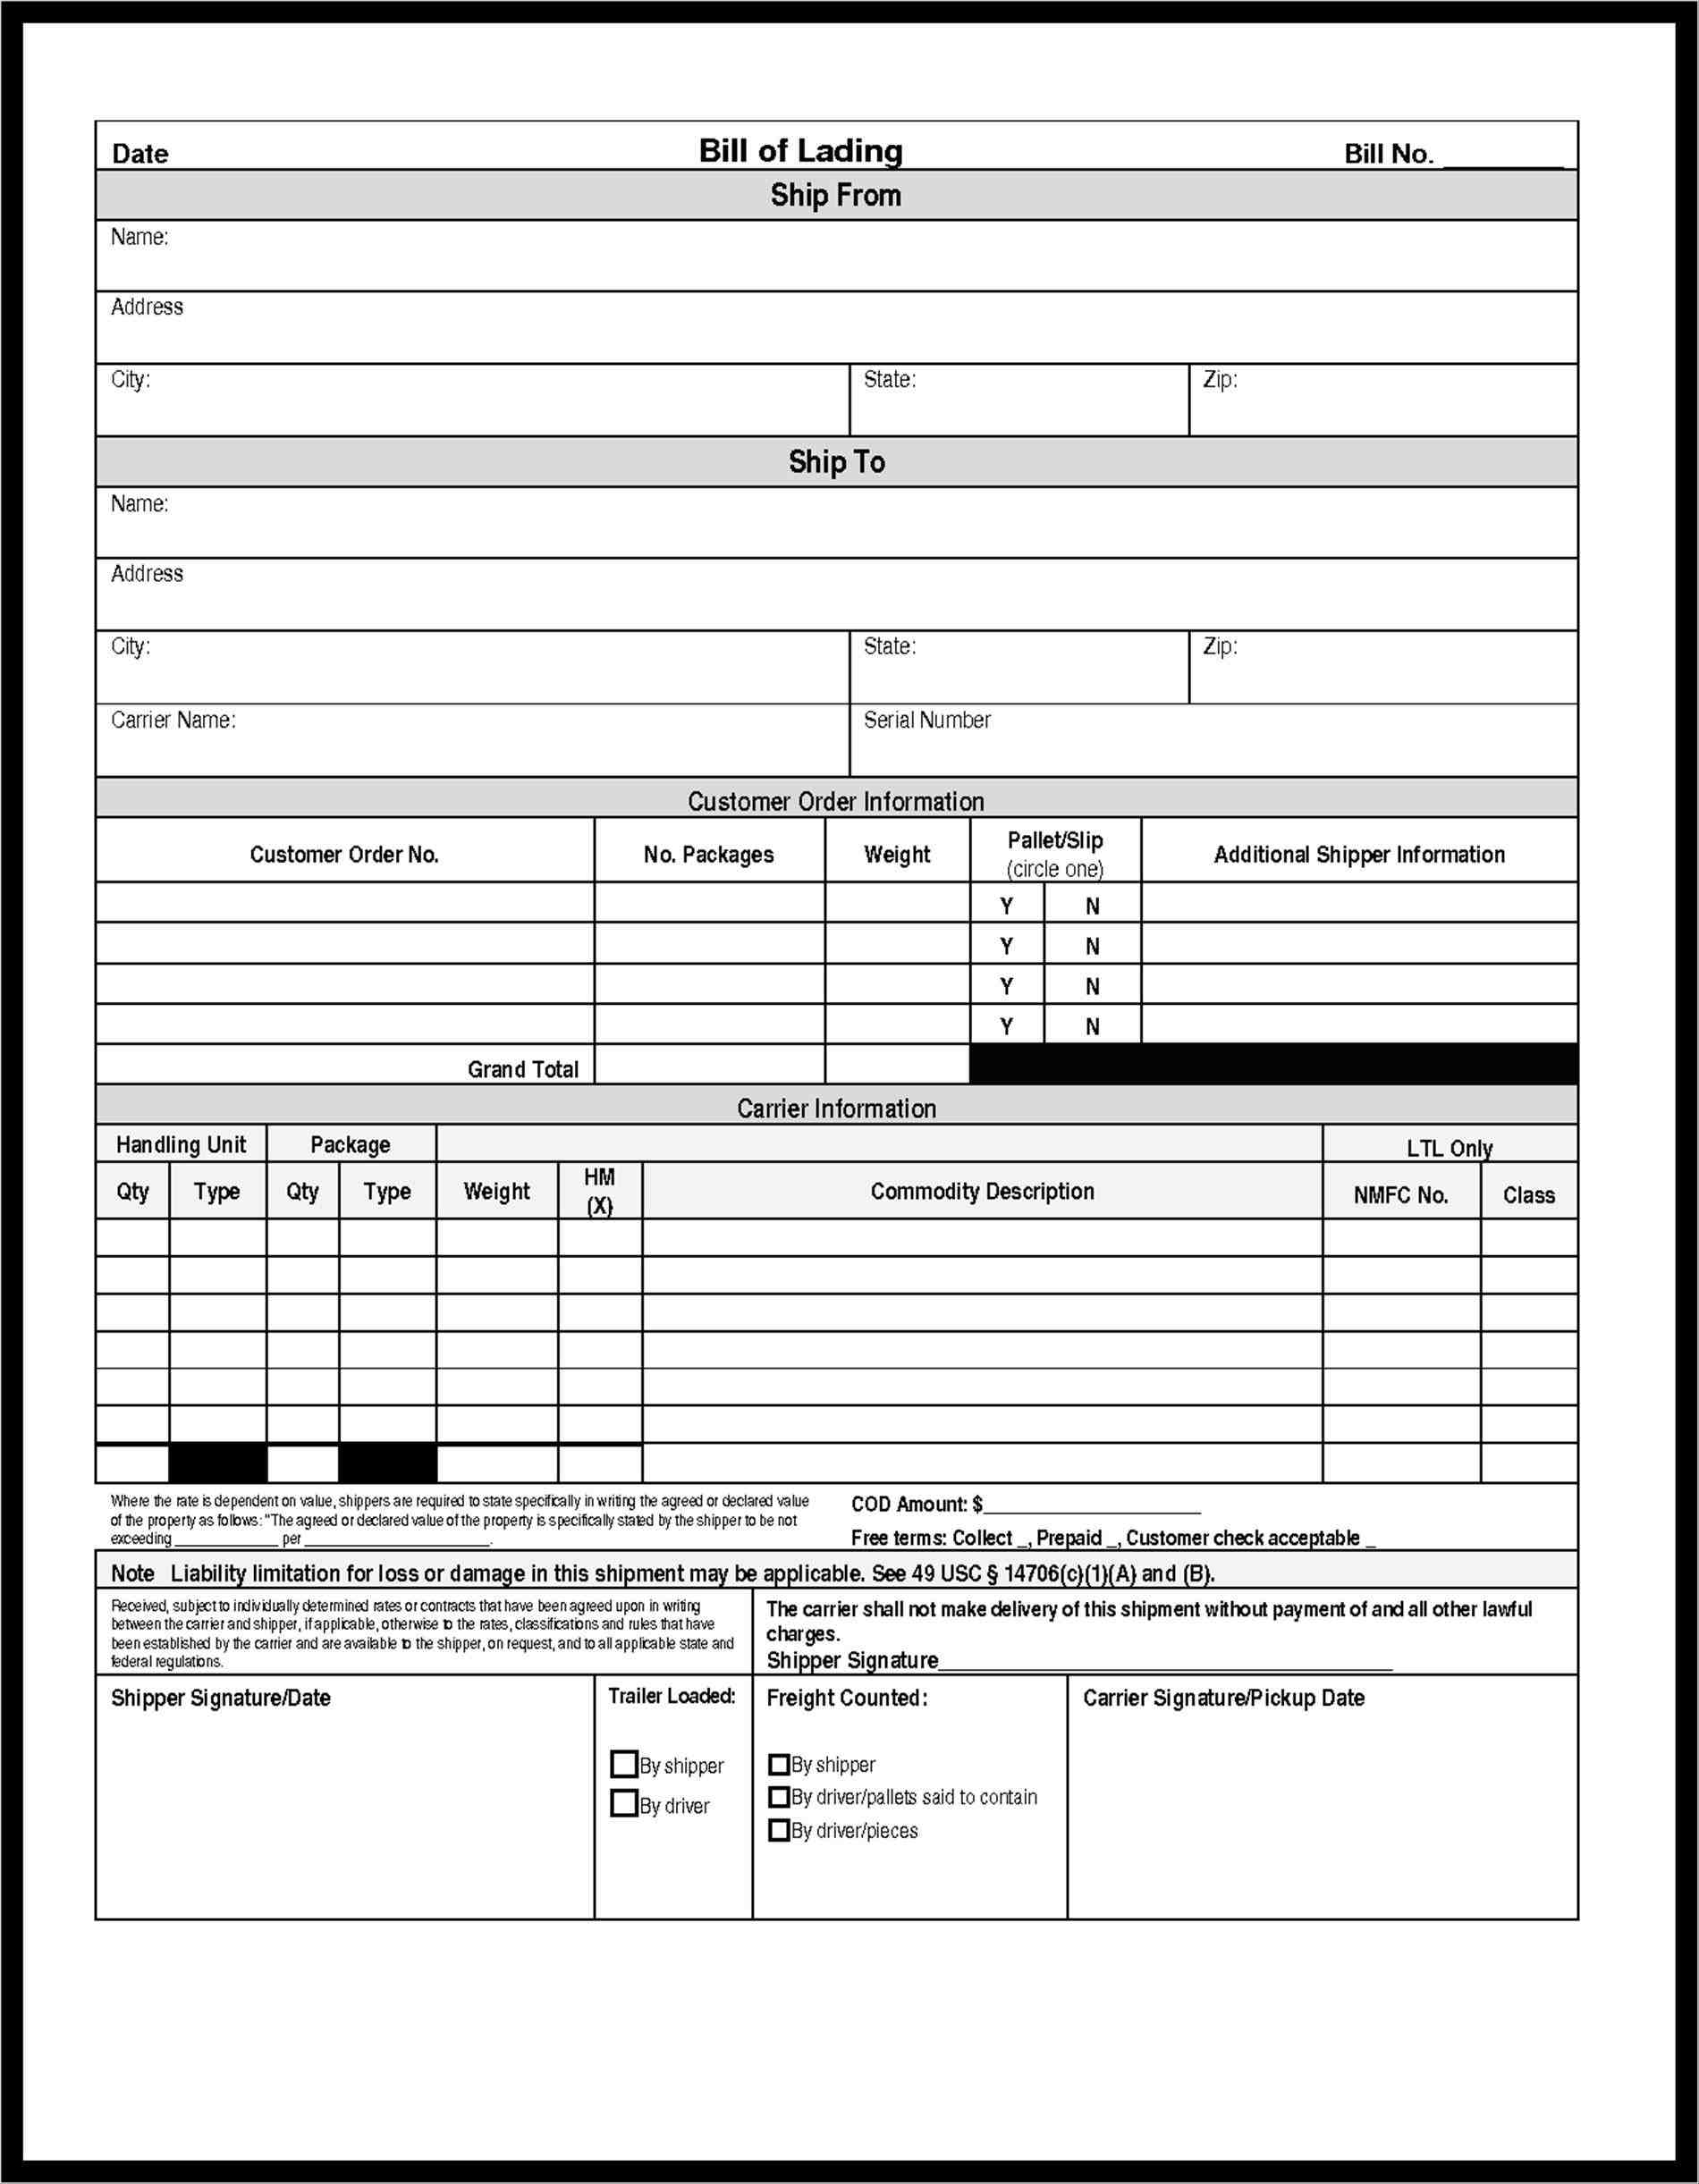 bill-of-lading-short-form-template-printable-word-searches